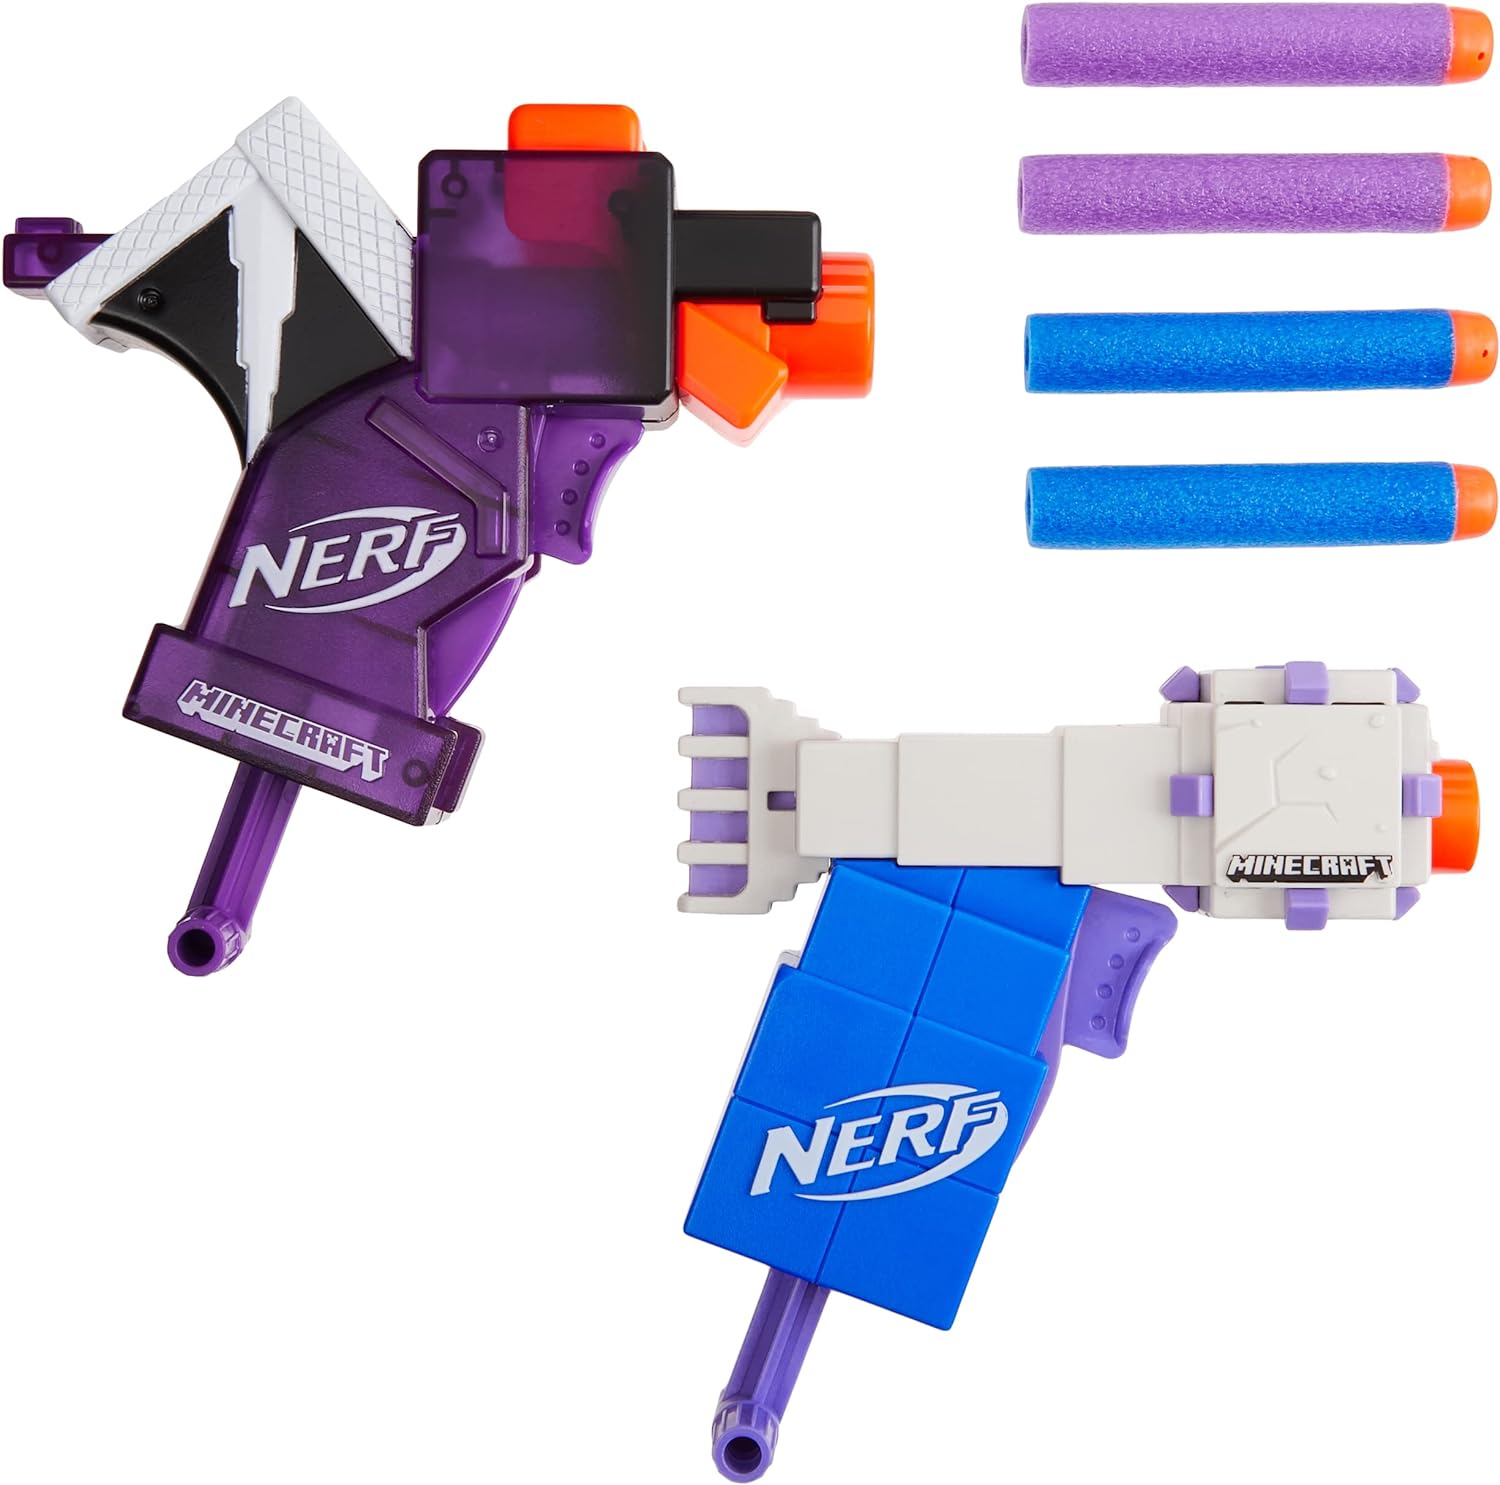 We bought this for our sons birthday as it is both the things he loves. Minecraft and Nerf. Definitely packs a punch when shot at the back of your head.